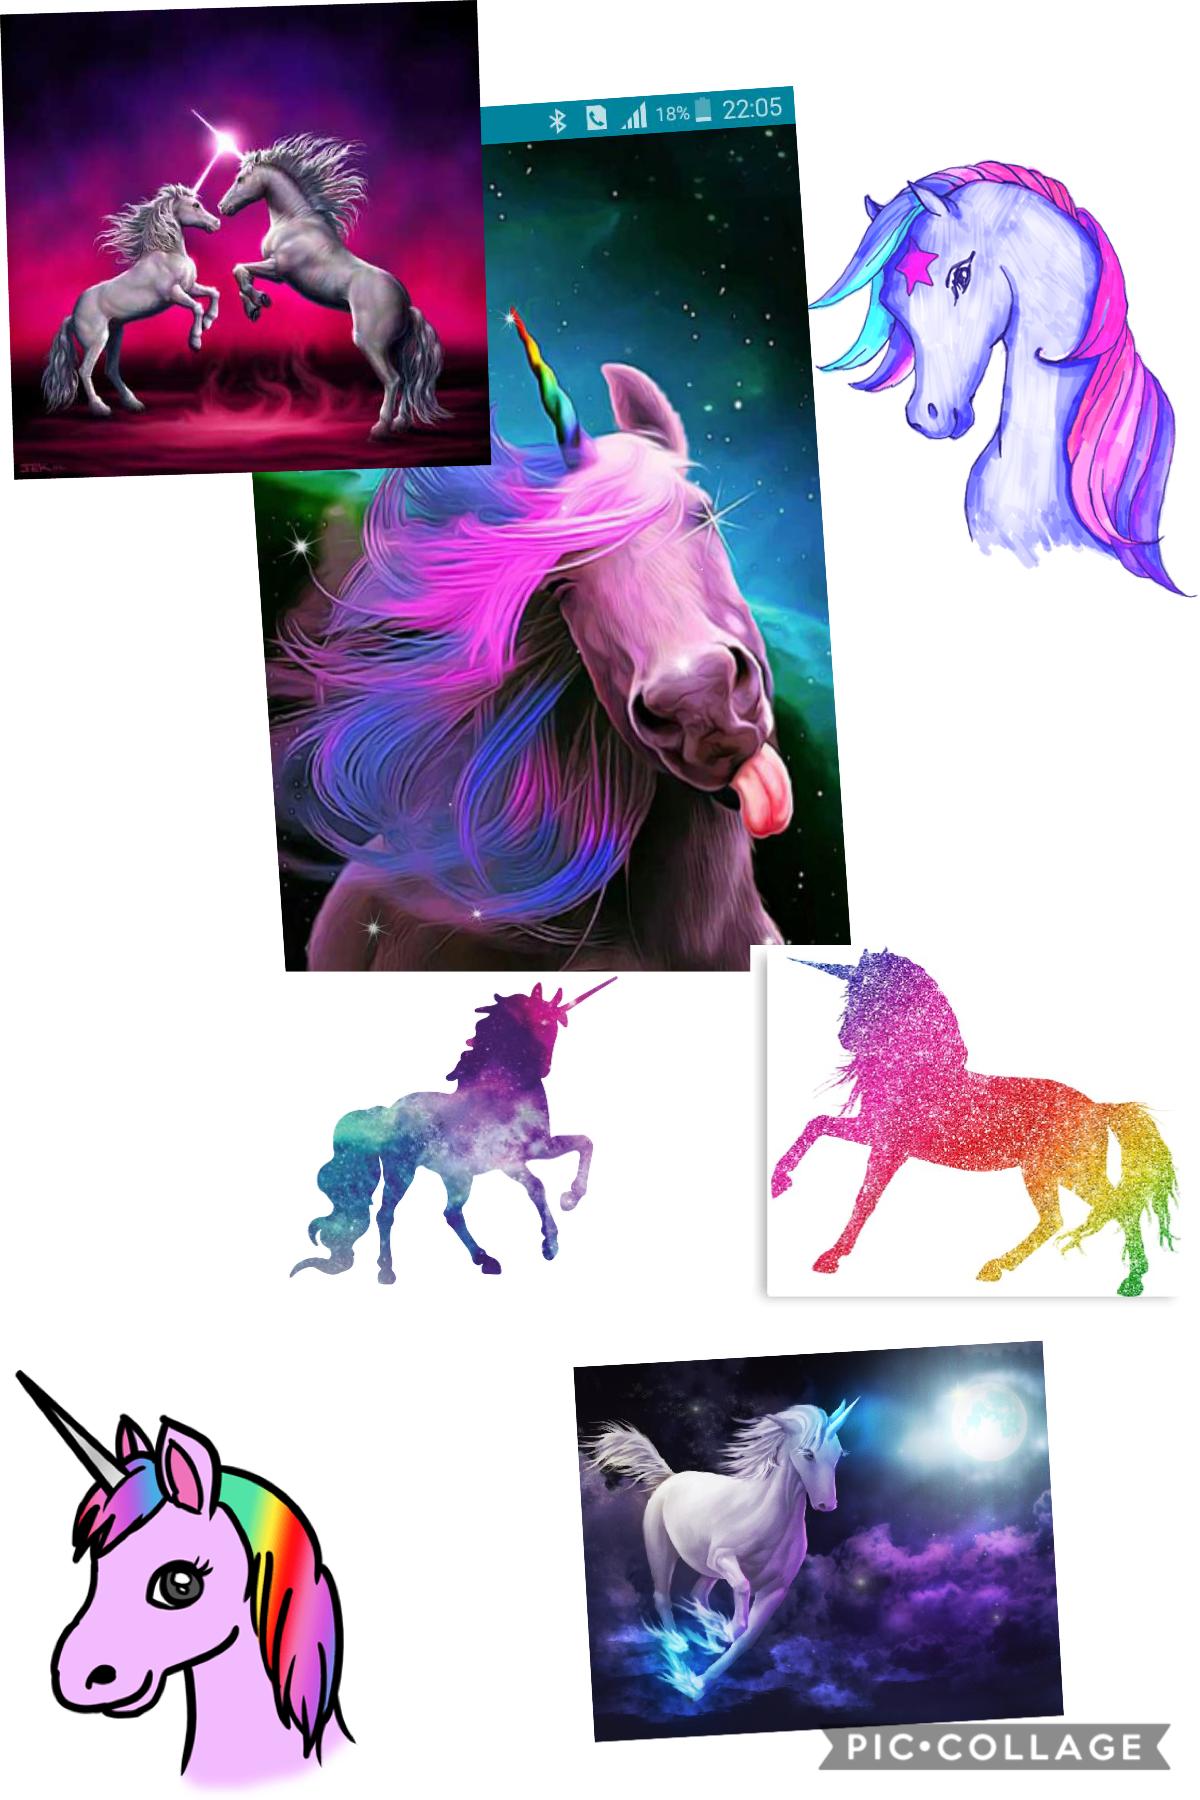 My favorite Fantasy animal is a unicorn. What is your favorite fantasy animal?